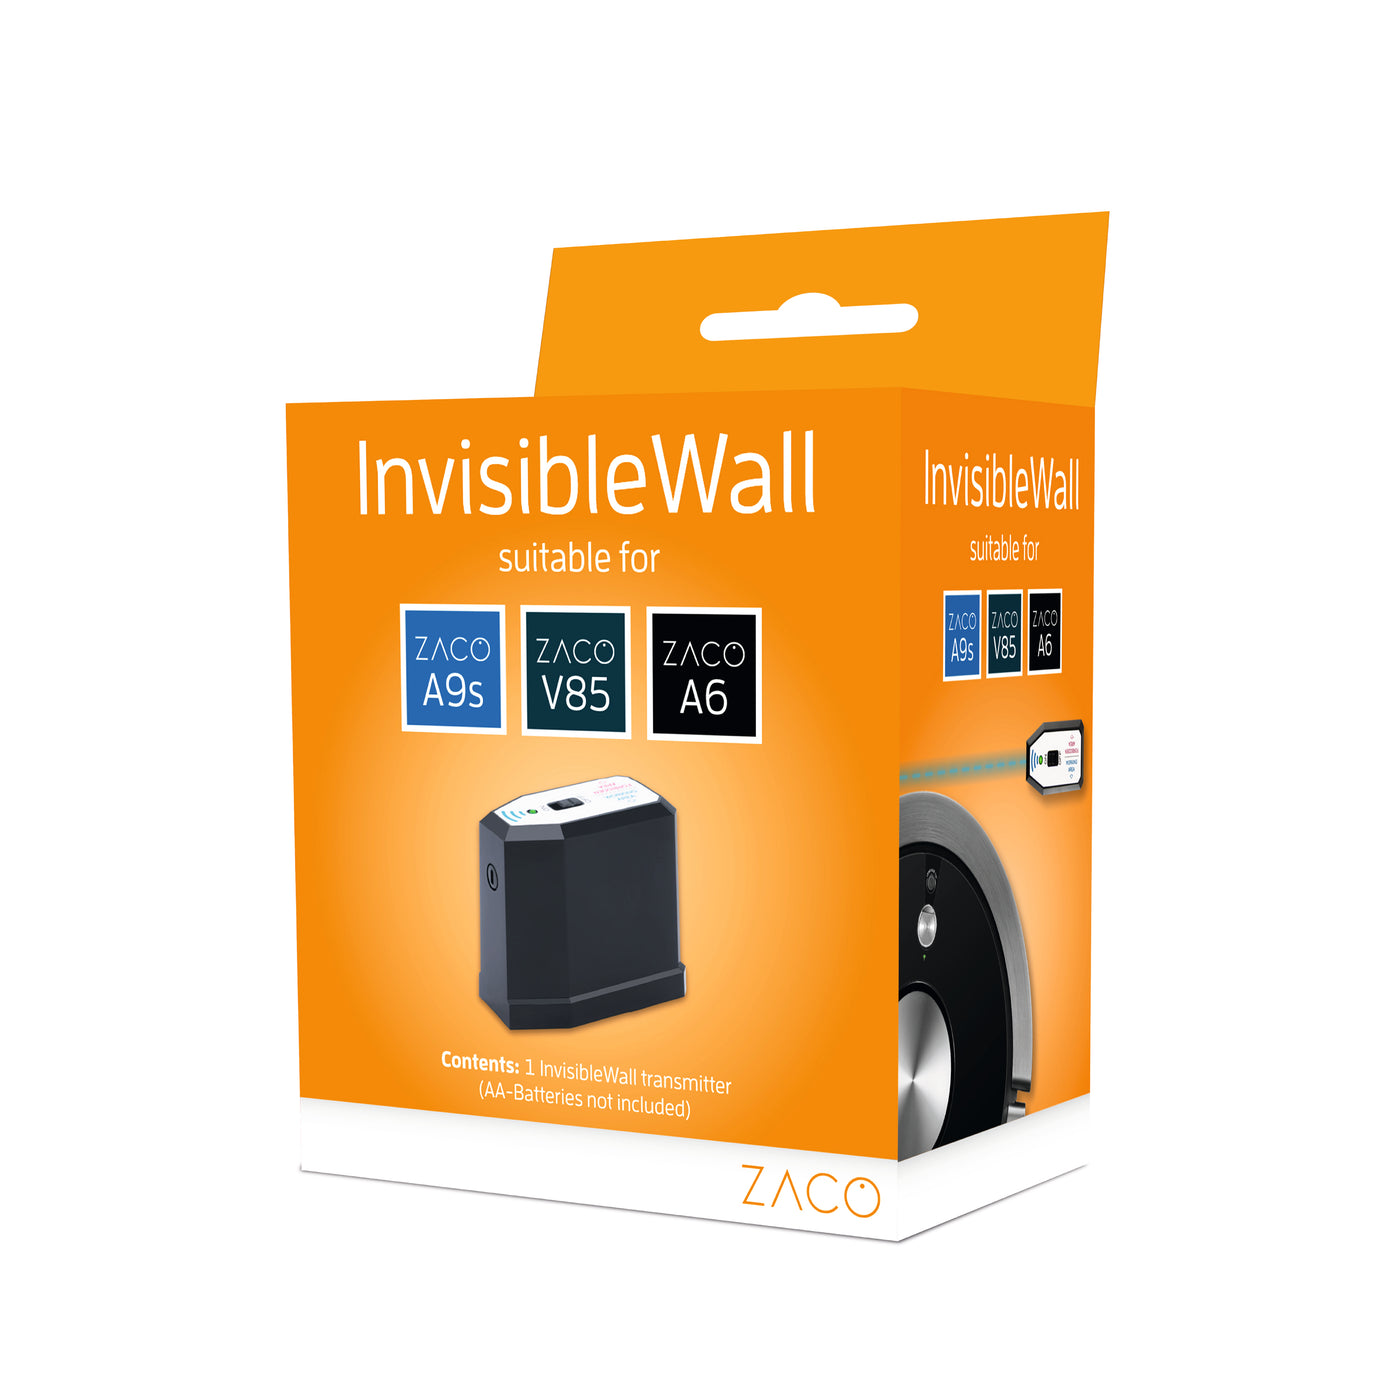 InvisibleWall for ZACO A6, A9s, A9sPro, V85